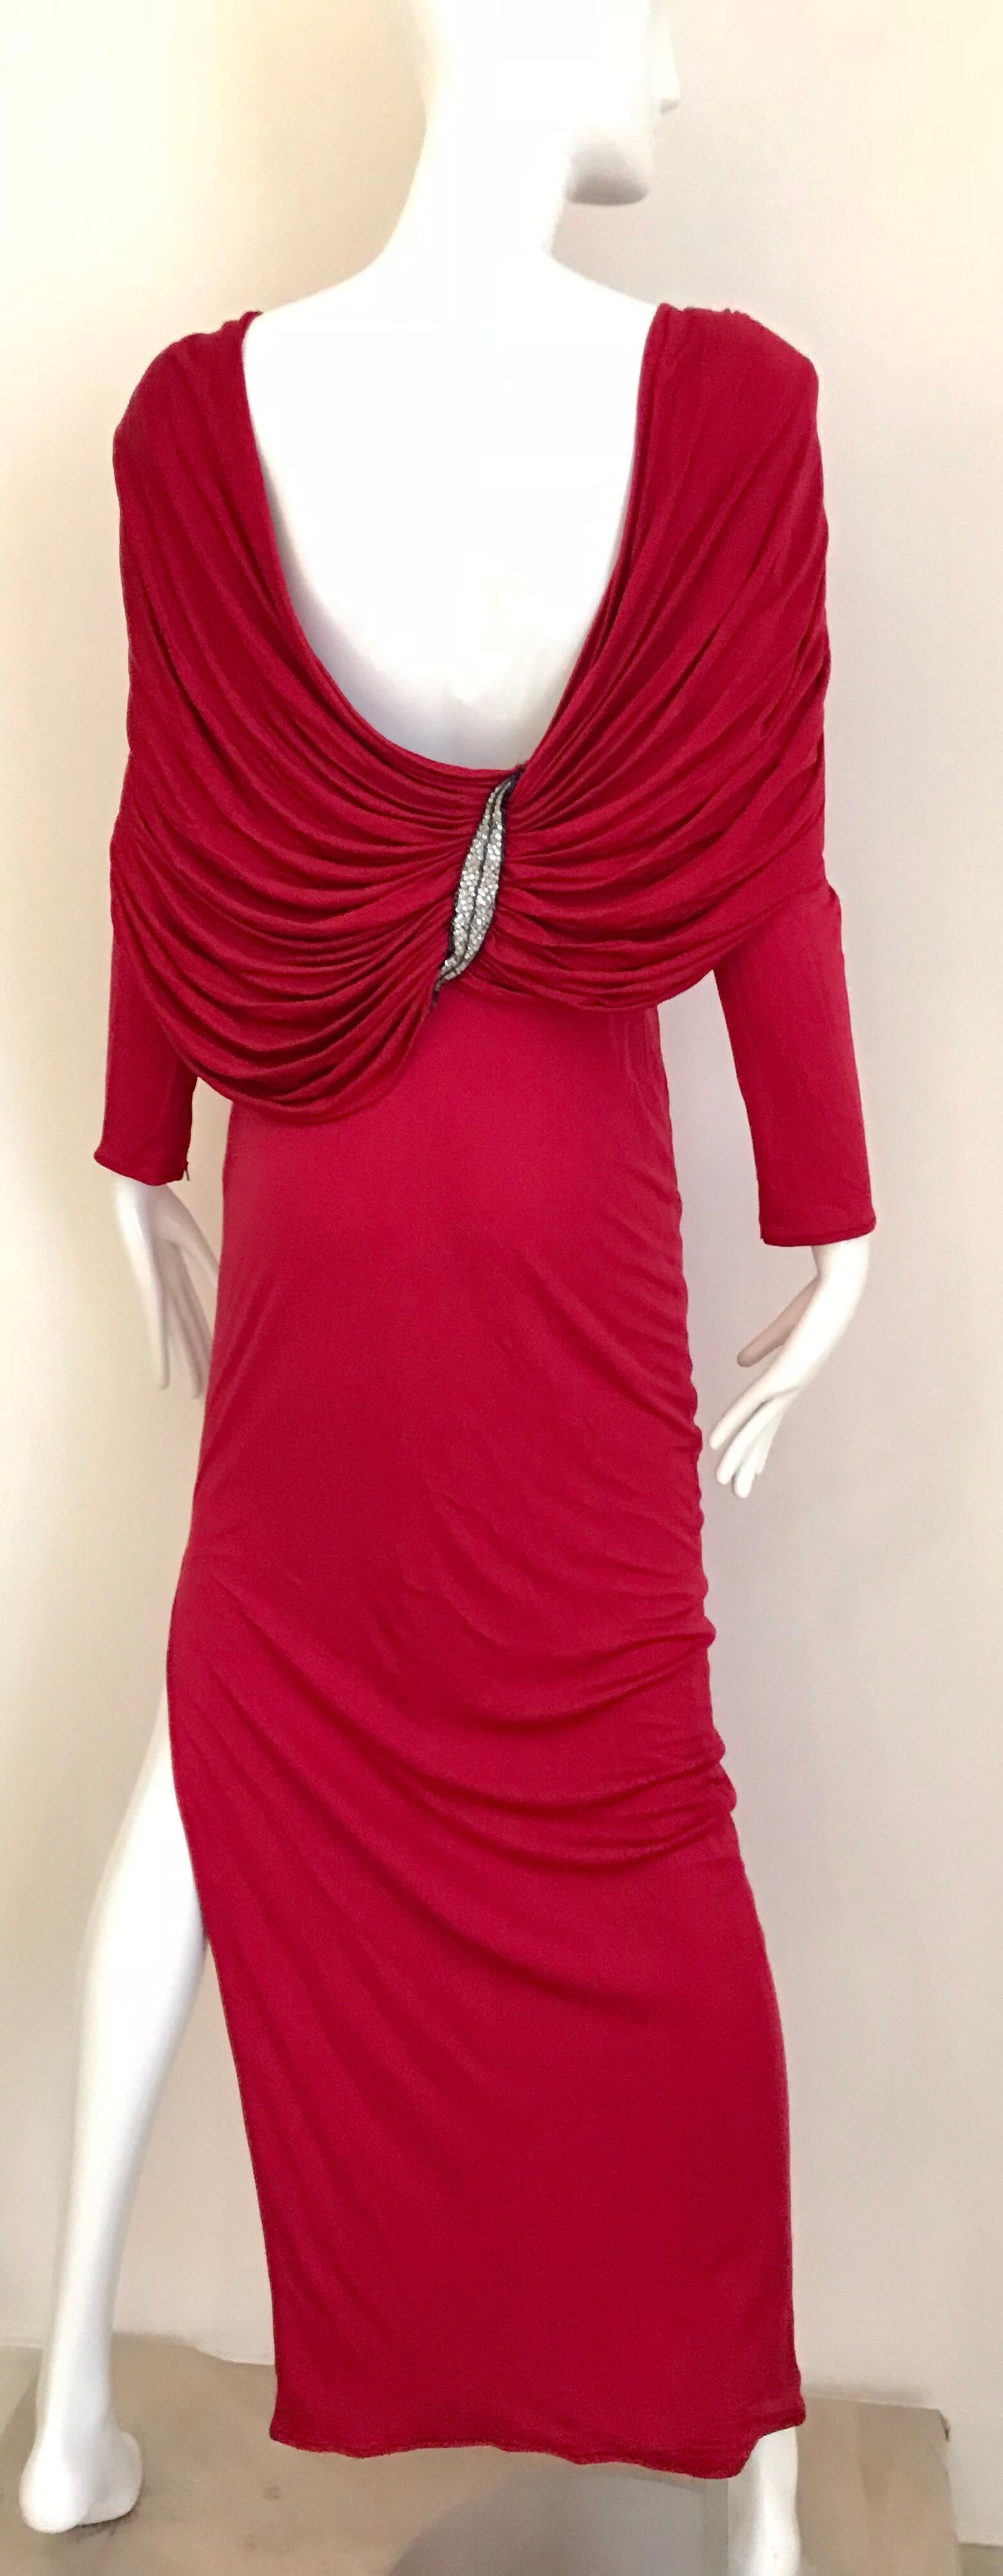 Beautiful vintage VALENTINO boutique silk jersey red ( more berry tone) long sleeve dress with open back ( drape). Dress has beaded appliqué on both shoulder. Perfect for holiday party.
Fit best for US size 0/2/ max 4.  Although the dress marked